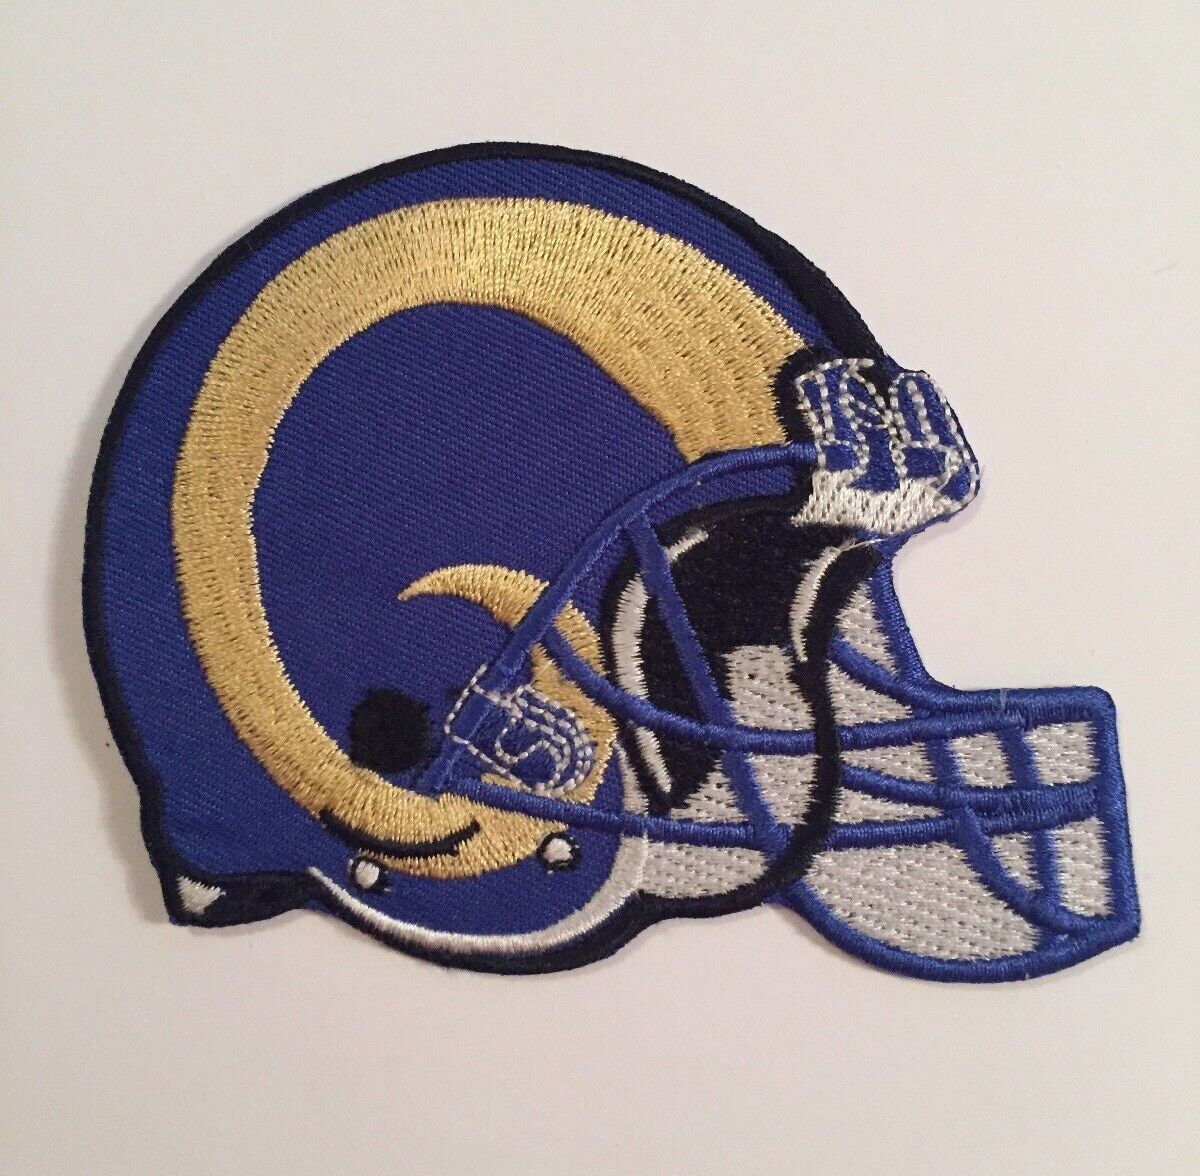 Rams Super Bowl Jerseys Get Gameday Ready With Super Bowl LVI Patch 